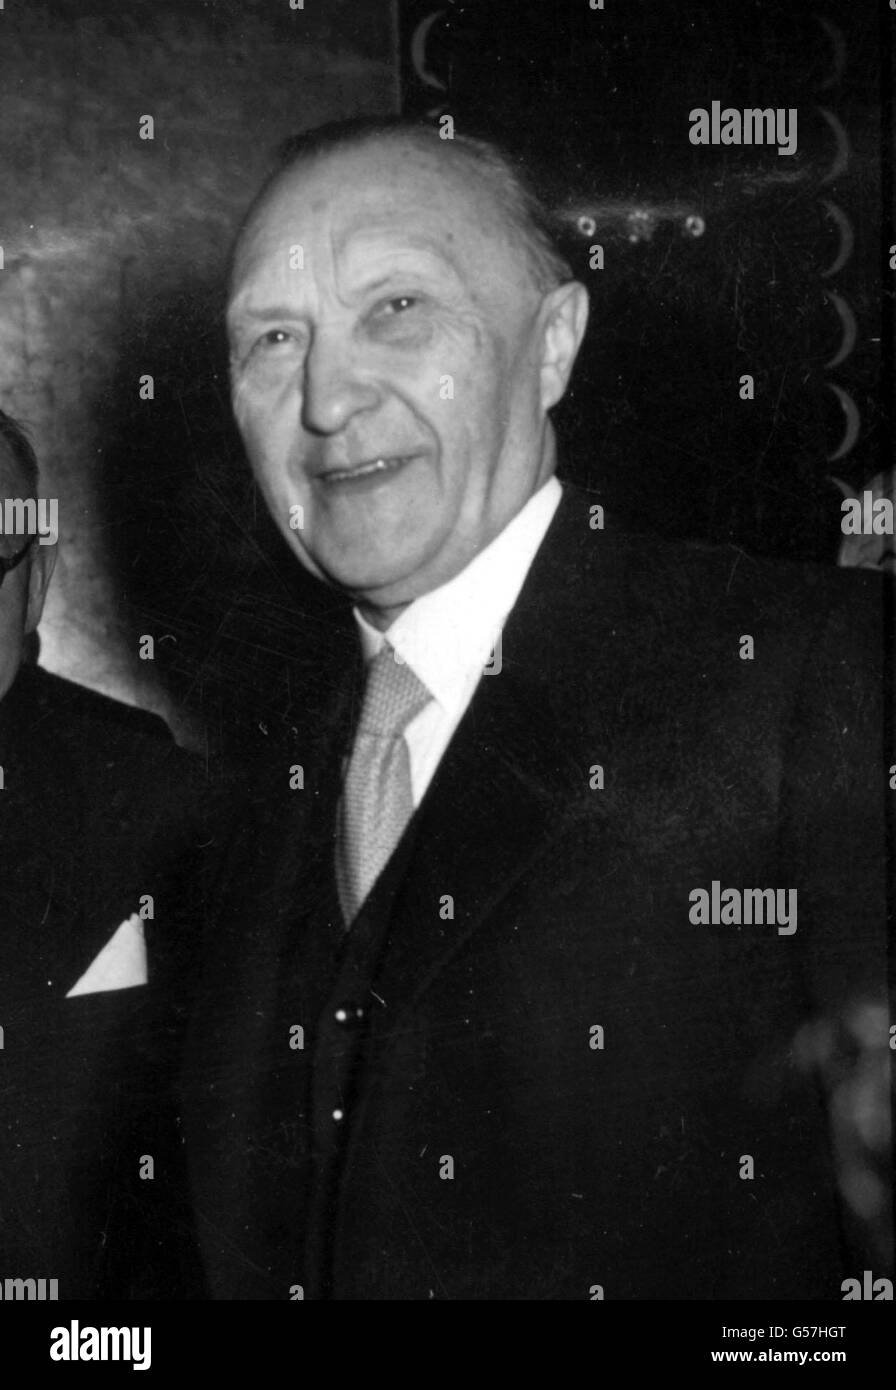 Dr Konrad Adenauer, the Federal German Chancellor , guest of Honour at a reception given by Britain's German colony at Claridge's Hotal, London. Dr Adenauerhad arrived in London for a five-day official visit to Britain. This was the first gathring of the German colony in Britain since before World War II. Stock Photo